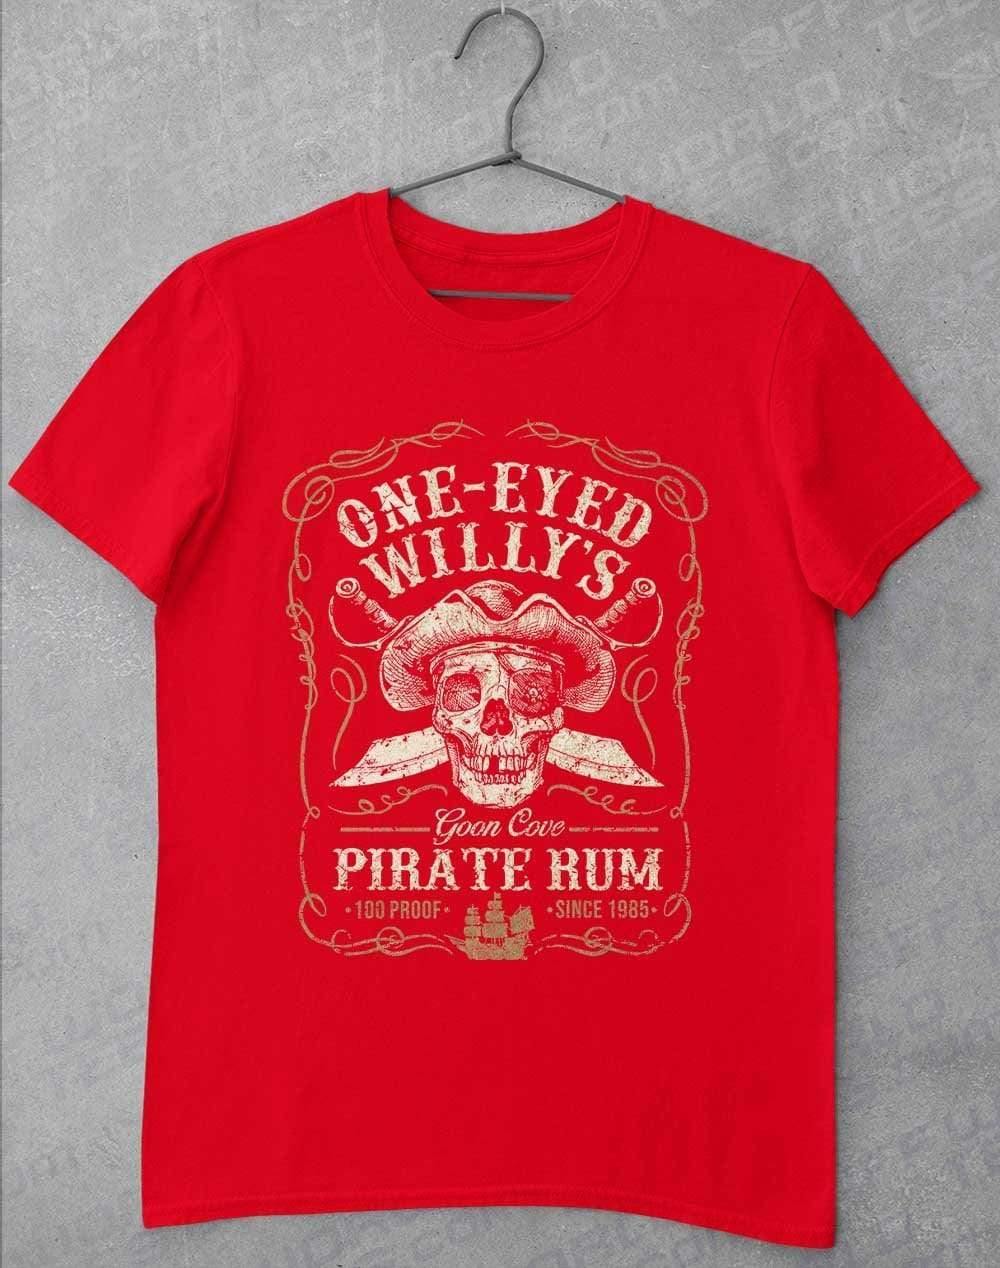 One-Eyed Willy's Goon Cove Rum T-Shirt S / Red  - Off World Tees